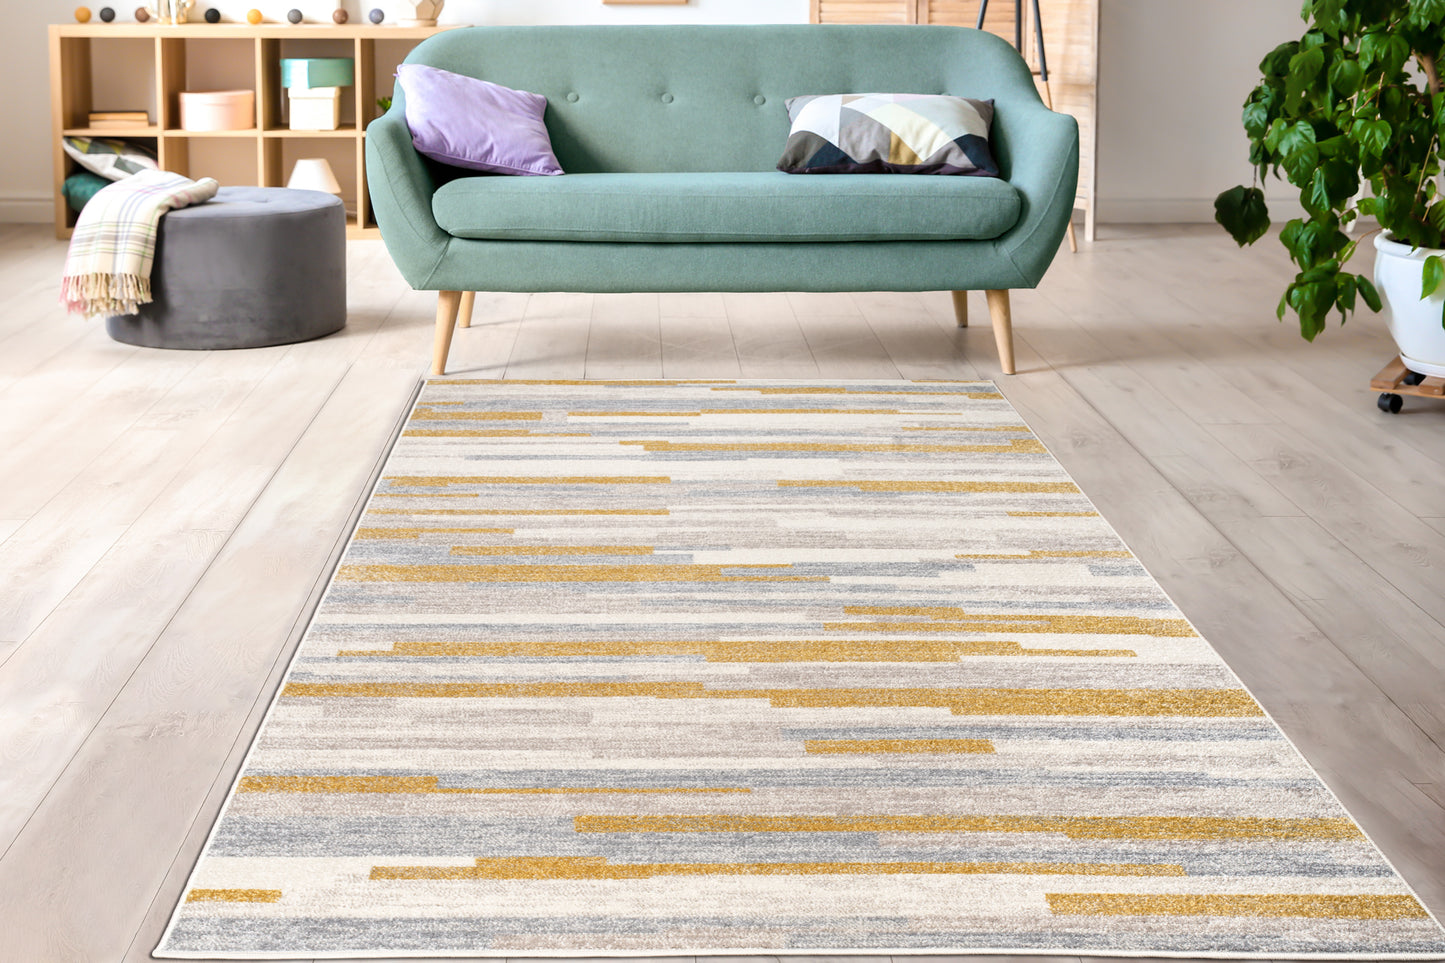 LaDole Rugs Abstract Striped Rustic Minimalist Contemporary Area Rug - Modern Carpet for Living Room, Bedroom, Office, Entrance, and Hallway - Mustard Yellow, Grey, and Beige